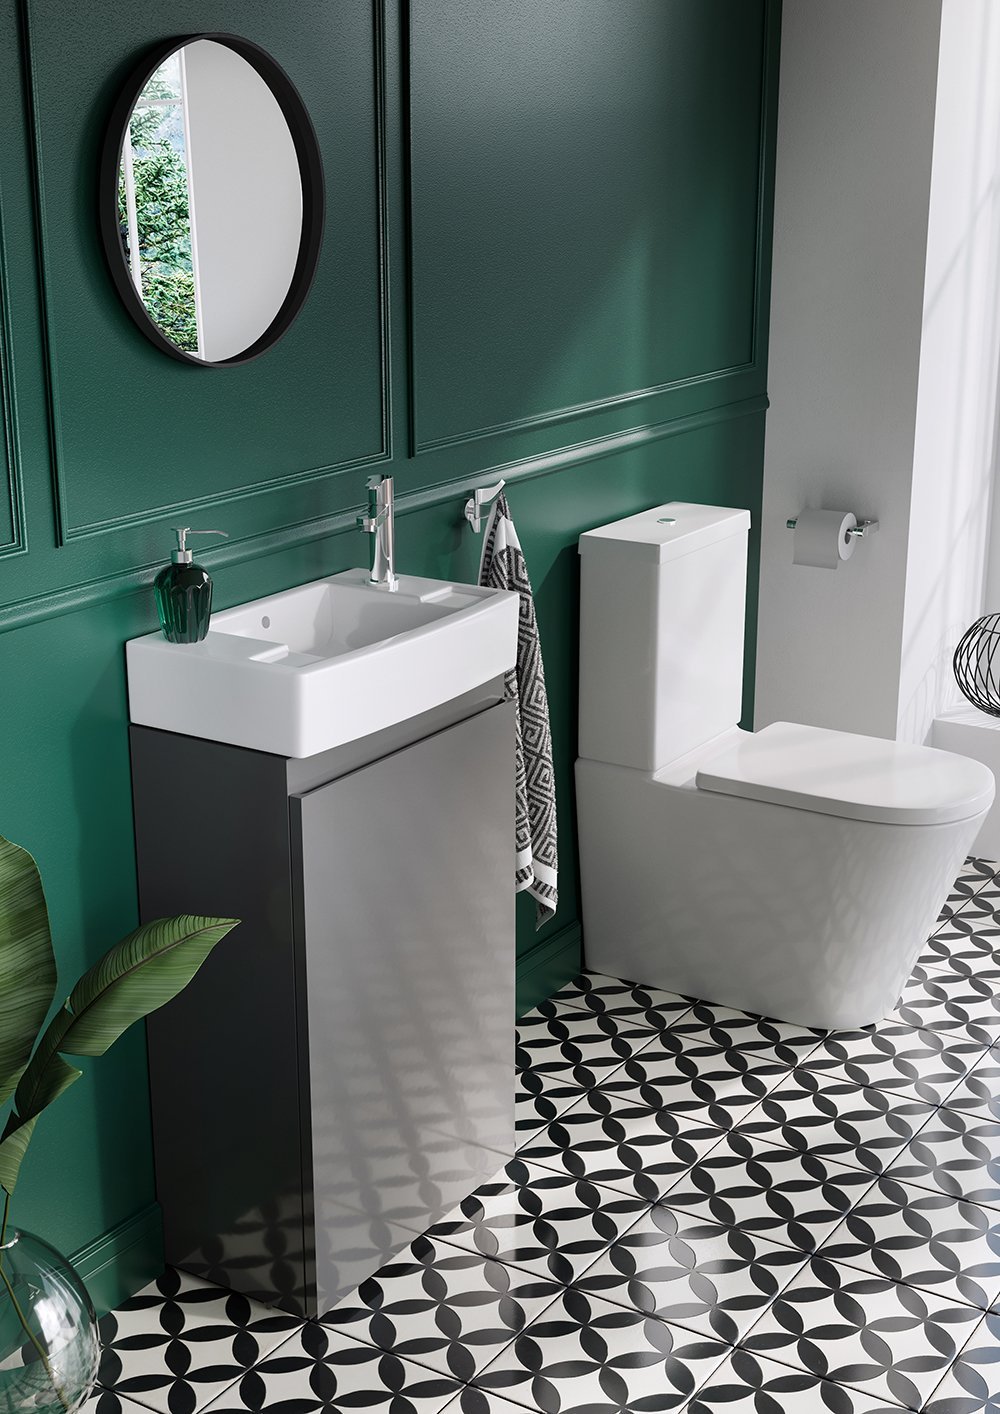 Narrow basins are popular in Cloakrooms and are a great small bathroom idea